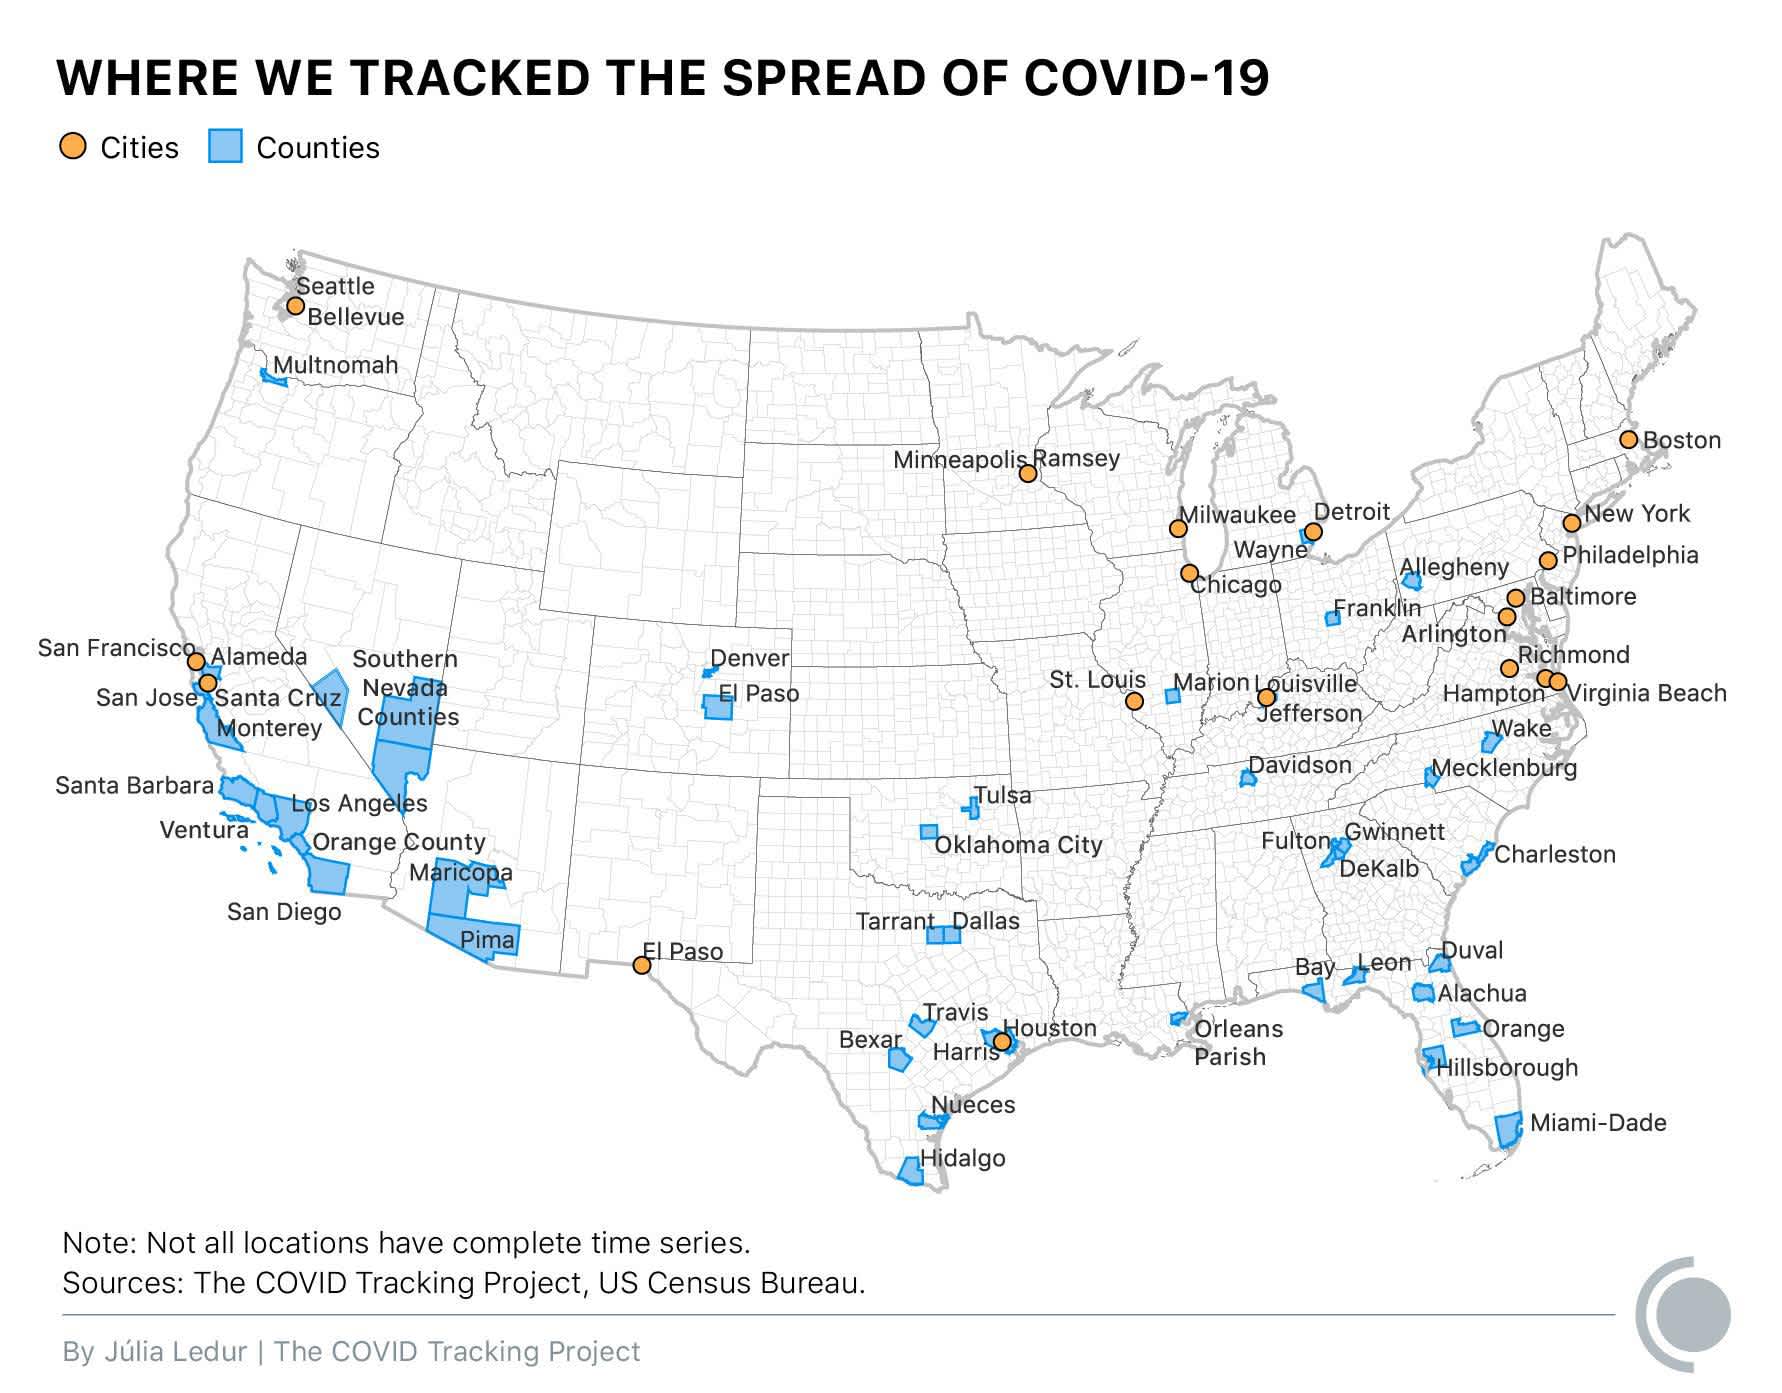 A map of the country that highlights the 65 cities and counties The COVID Tracking Project has collected data for with the new City Dataset.